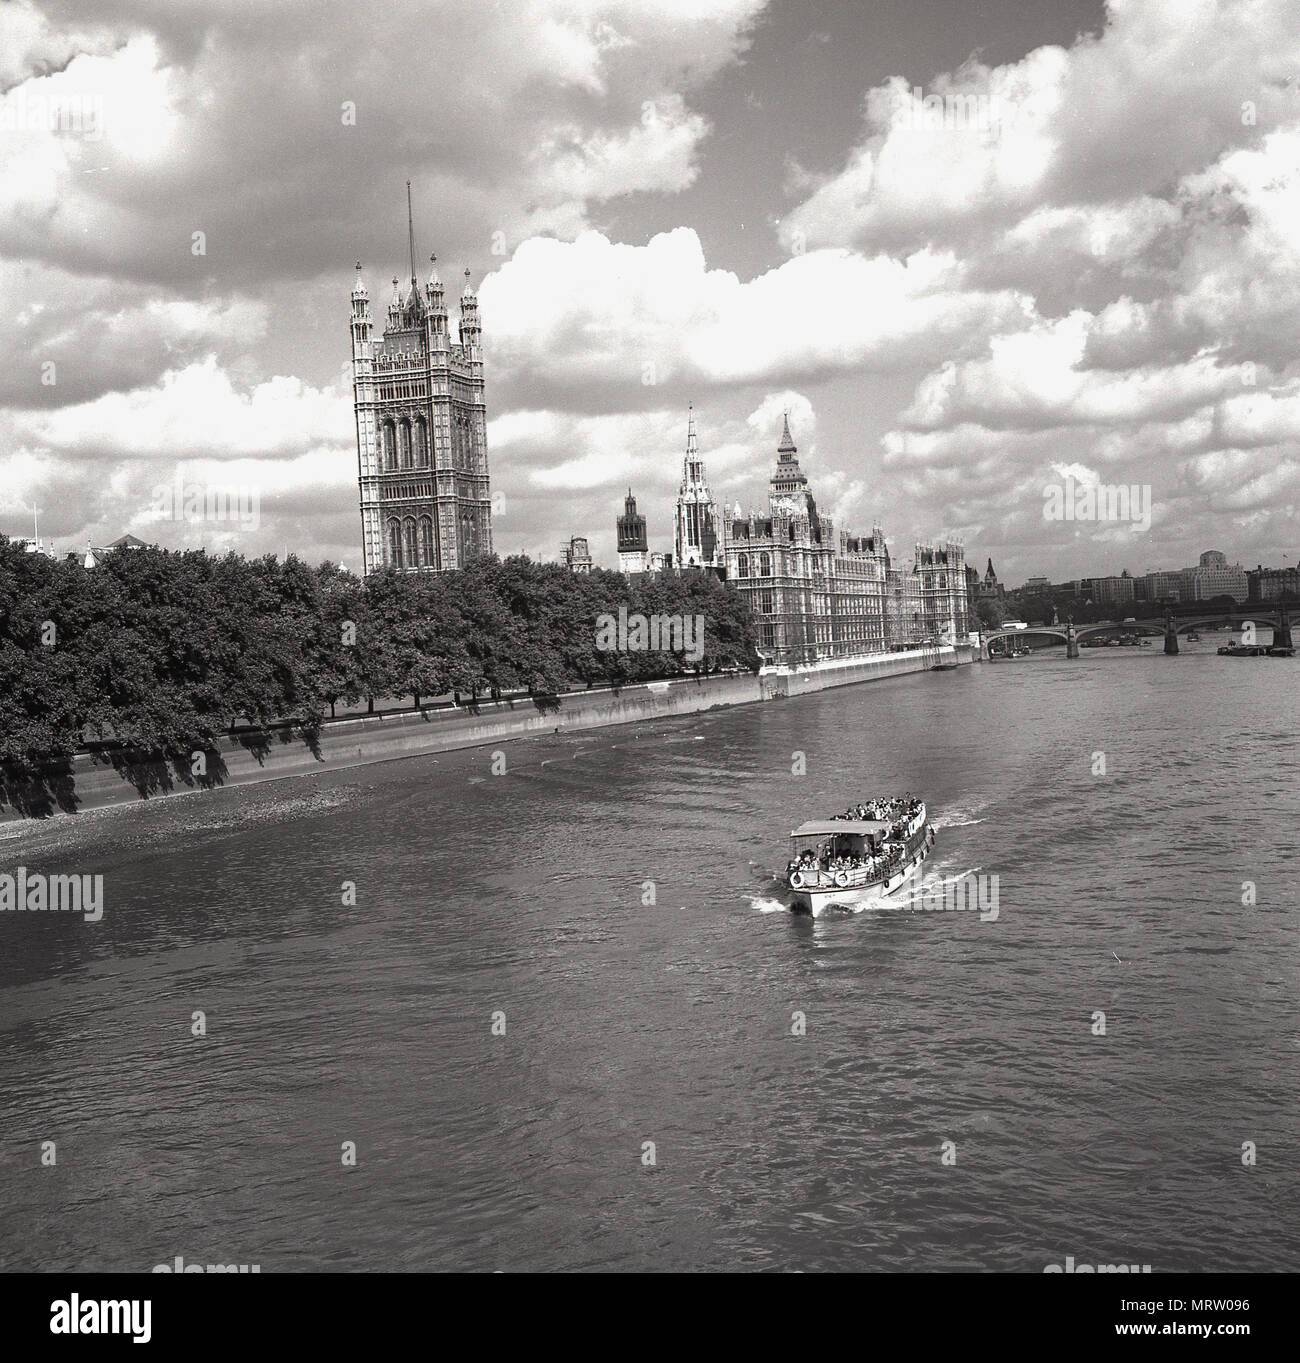 1960s, historical, view down the River Thames, London, showing on the left, the Palace of Westminster, the meeting place of the UK Government. At the palace are the two Houses of Parliament, the House of Commons and the House of Lords. Stock Photo